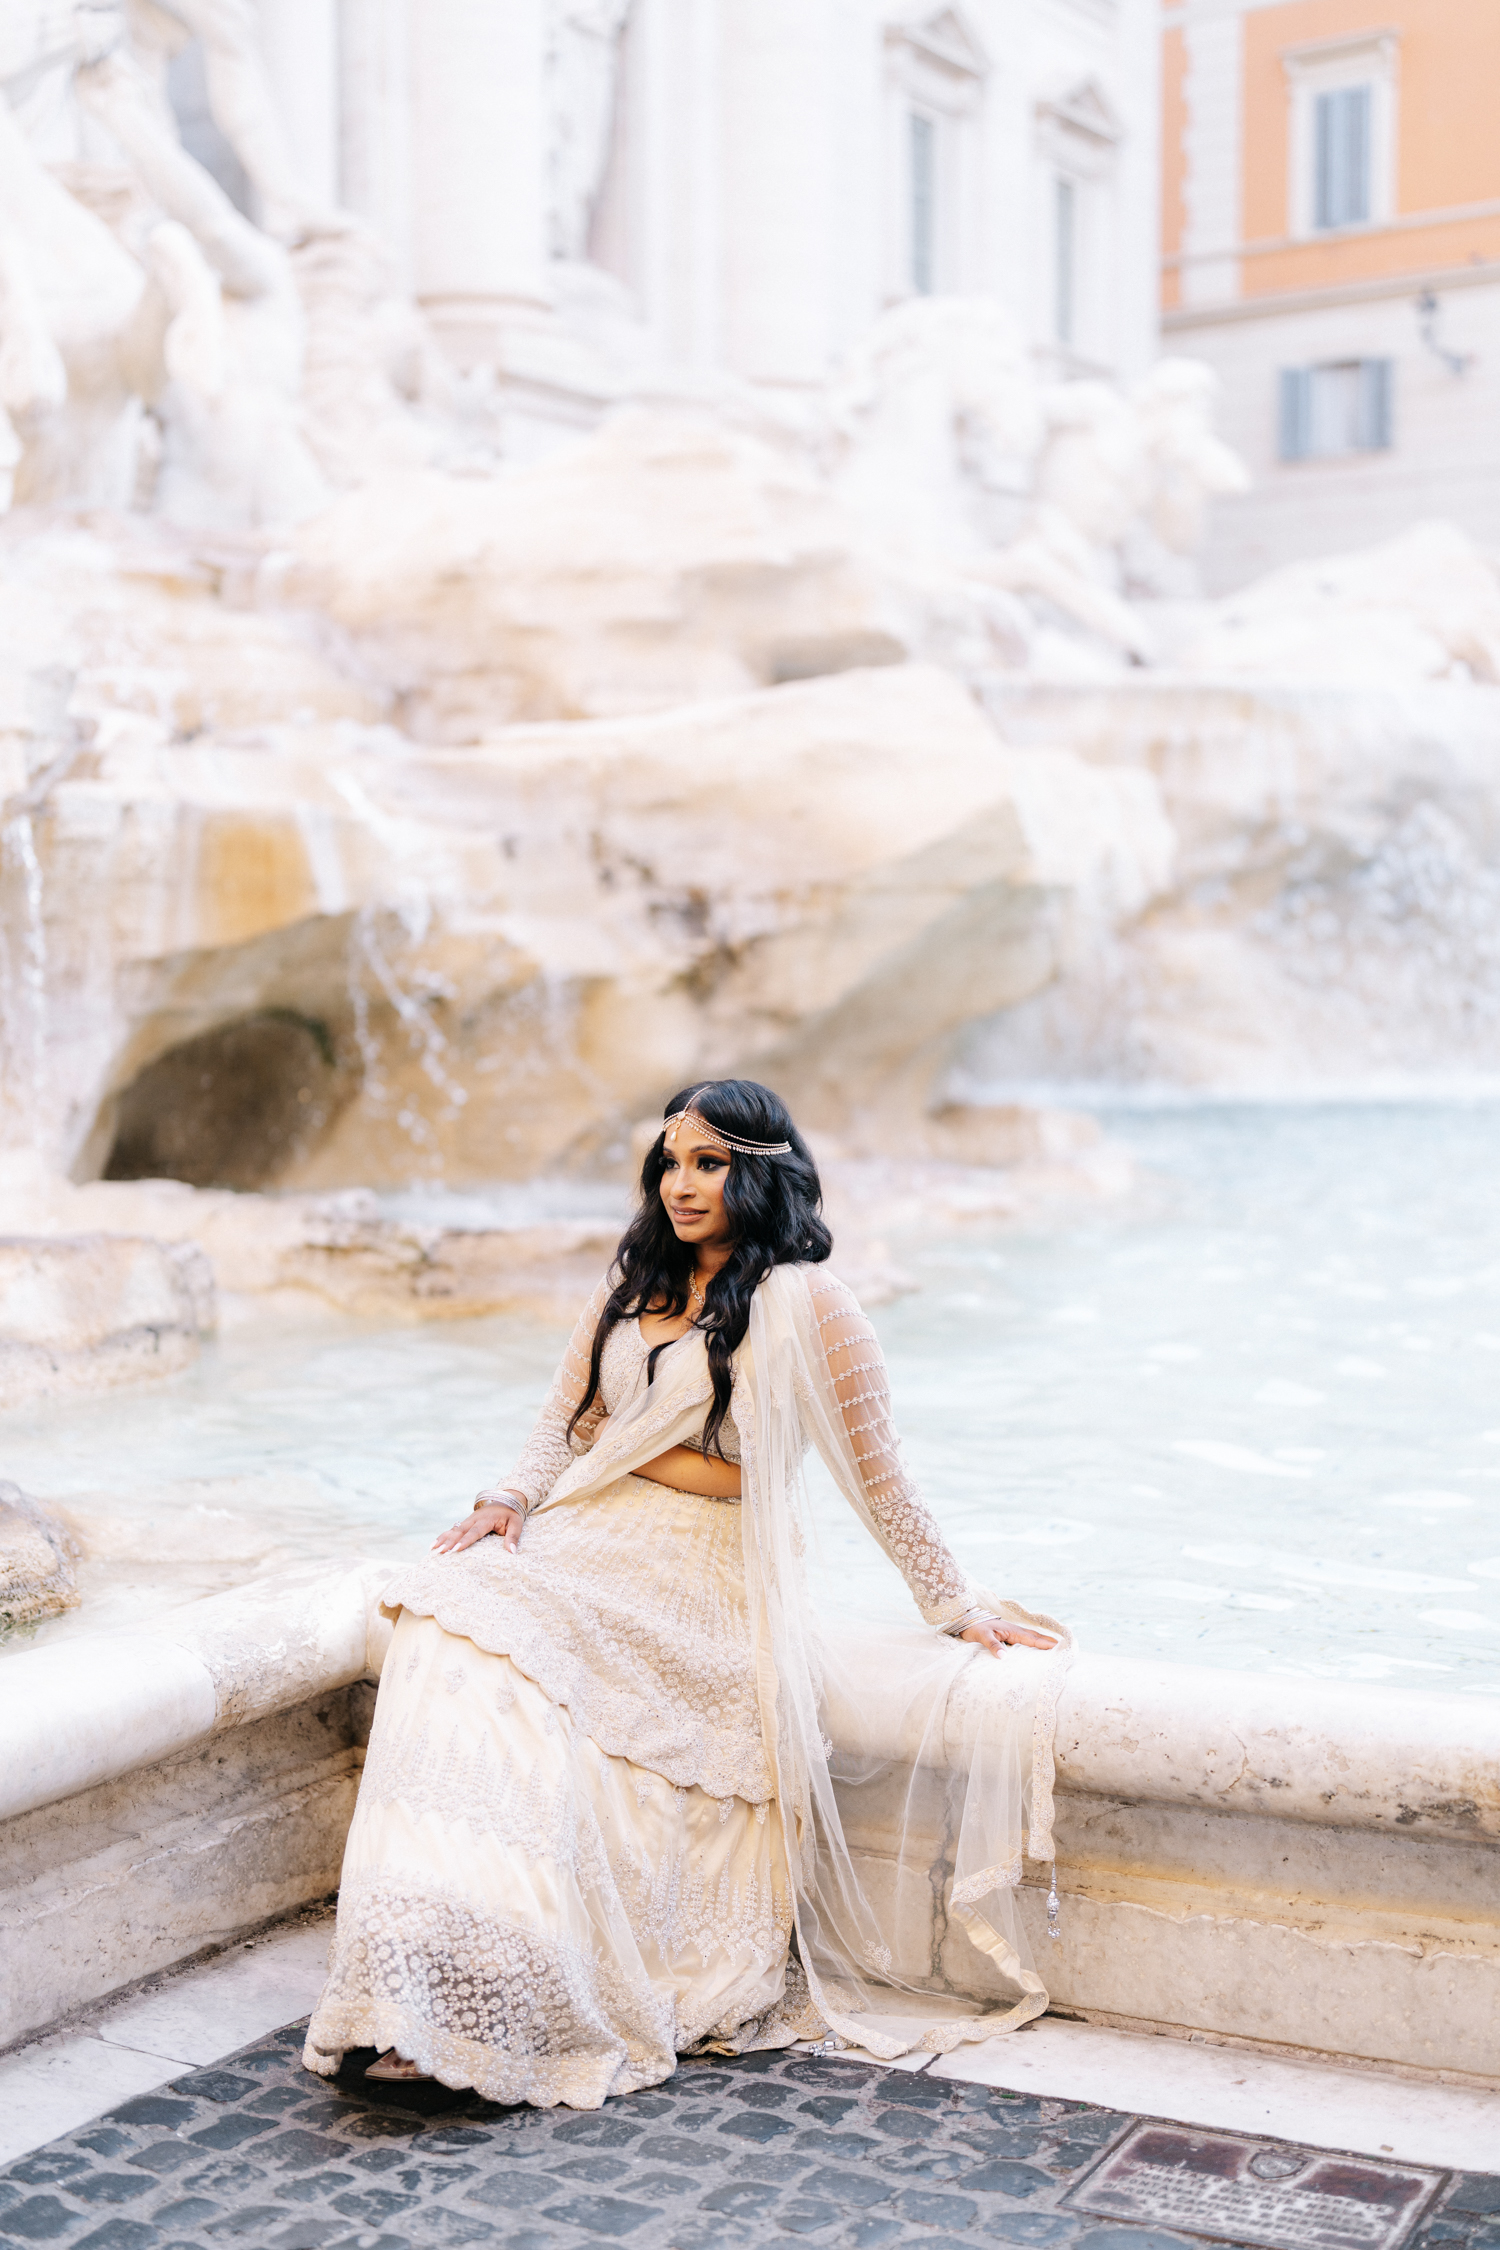 Rome wedding and elopement photographer for your photoshoot in Rome